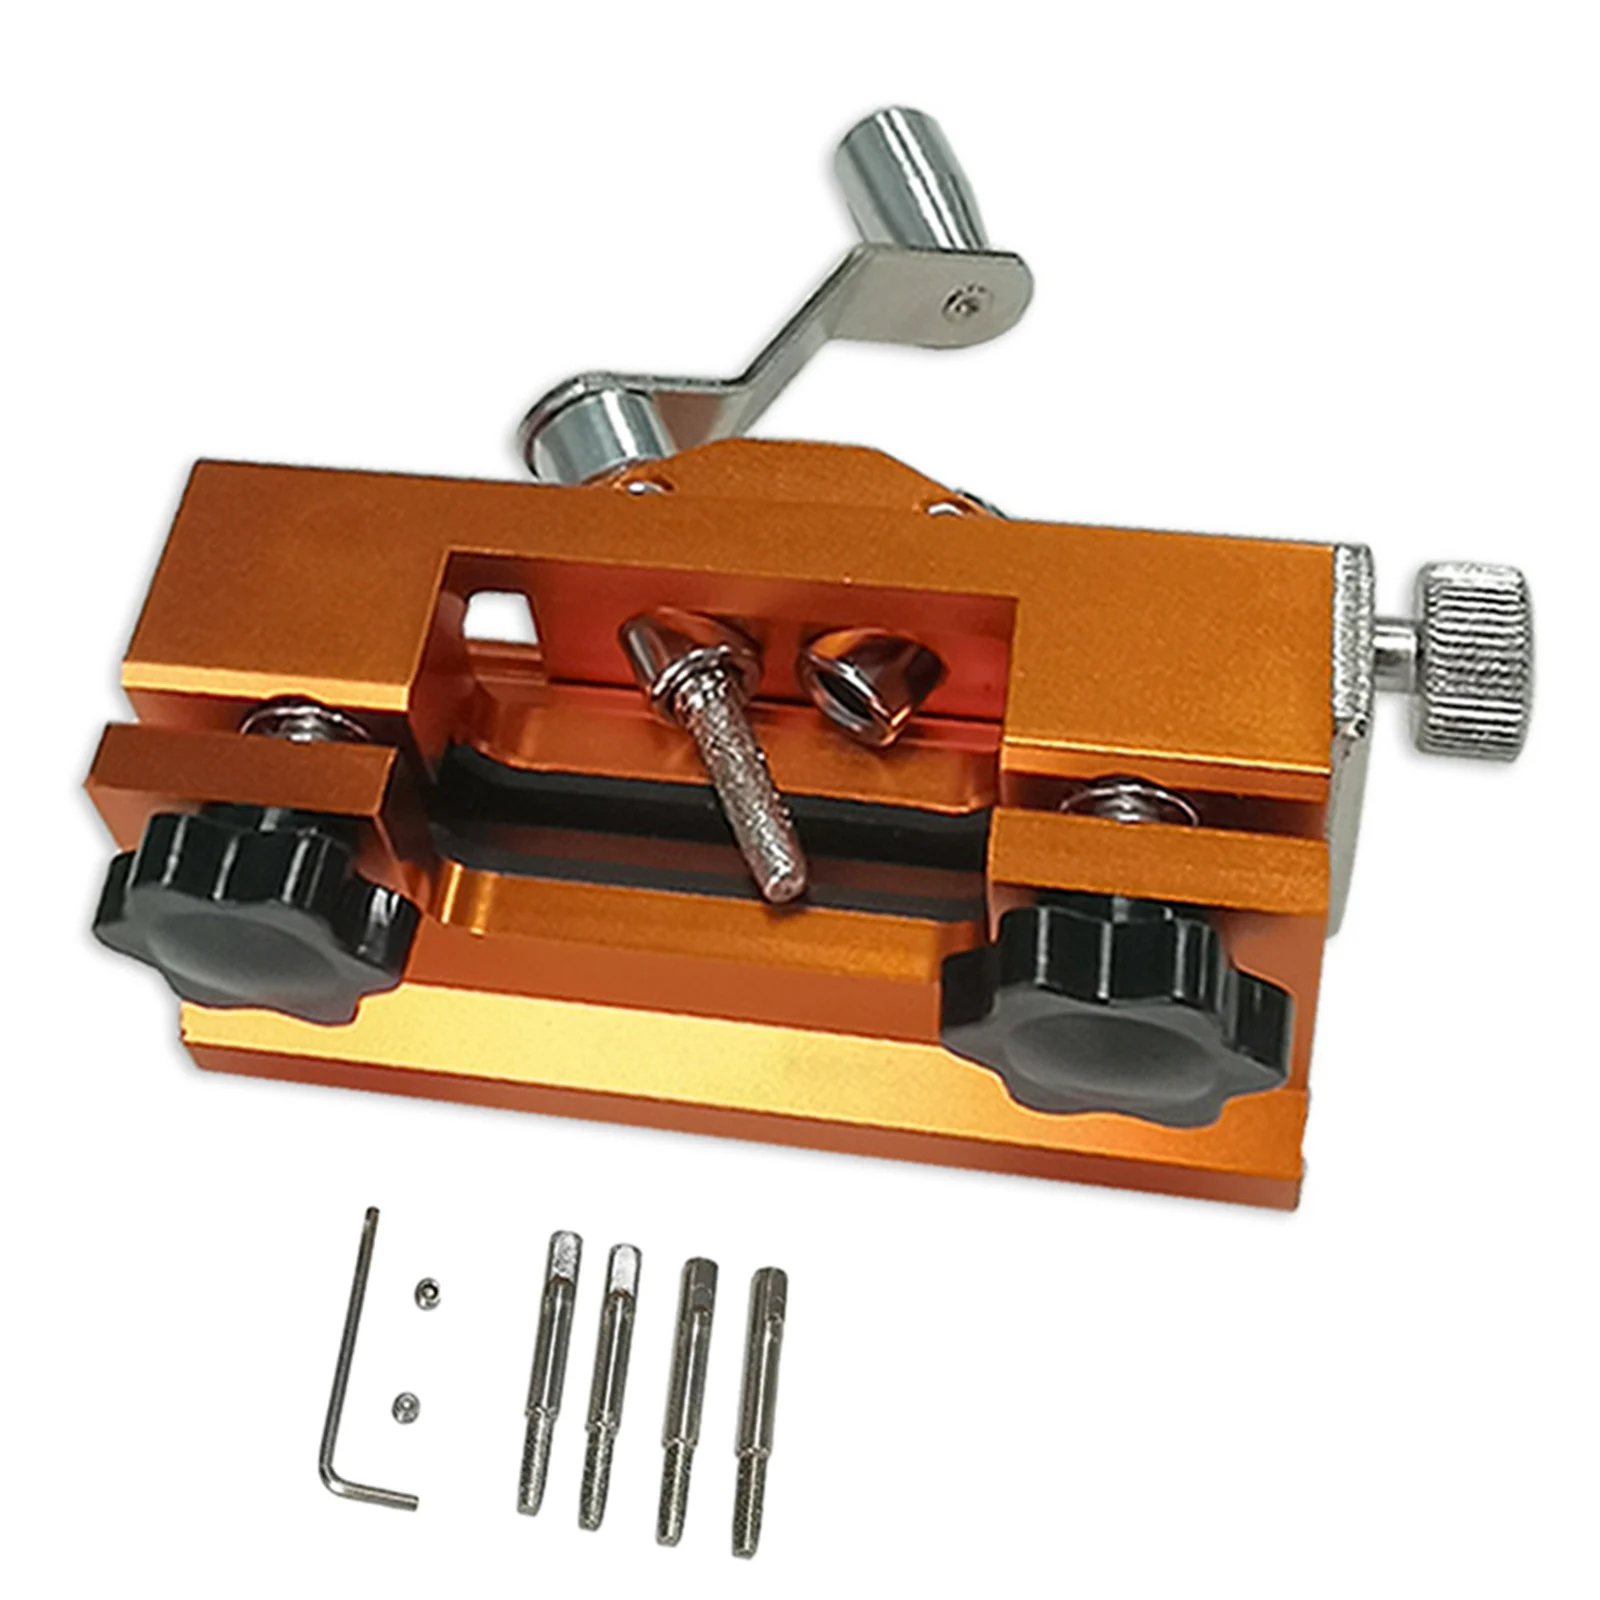 

Chainsaw Chain Sharpening Jig Chainsaw Sharpener Kit - Hand Chain Grinder For All Kinds Of Chain Saws And Electric Saws